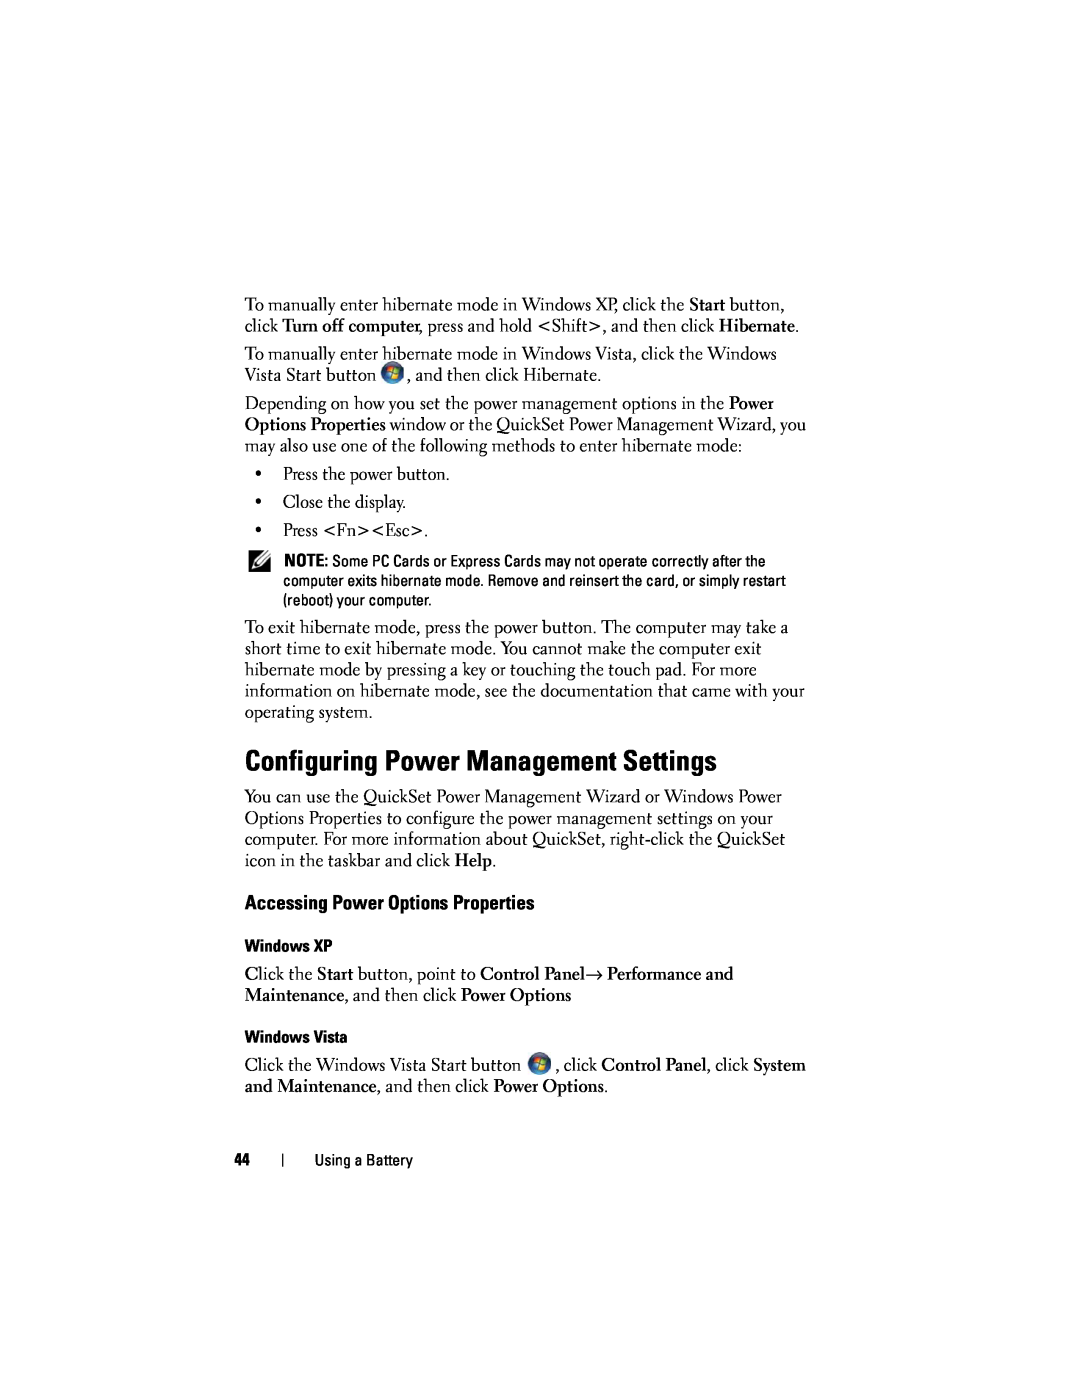 Dell D530 manual Configuring Power Management Settings, Accessing Power Options Properties 